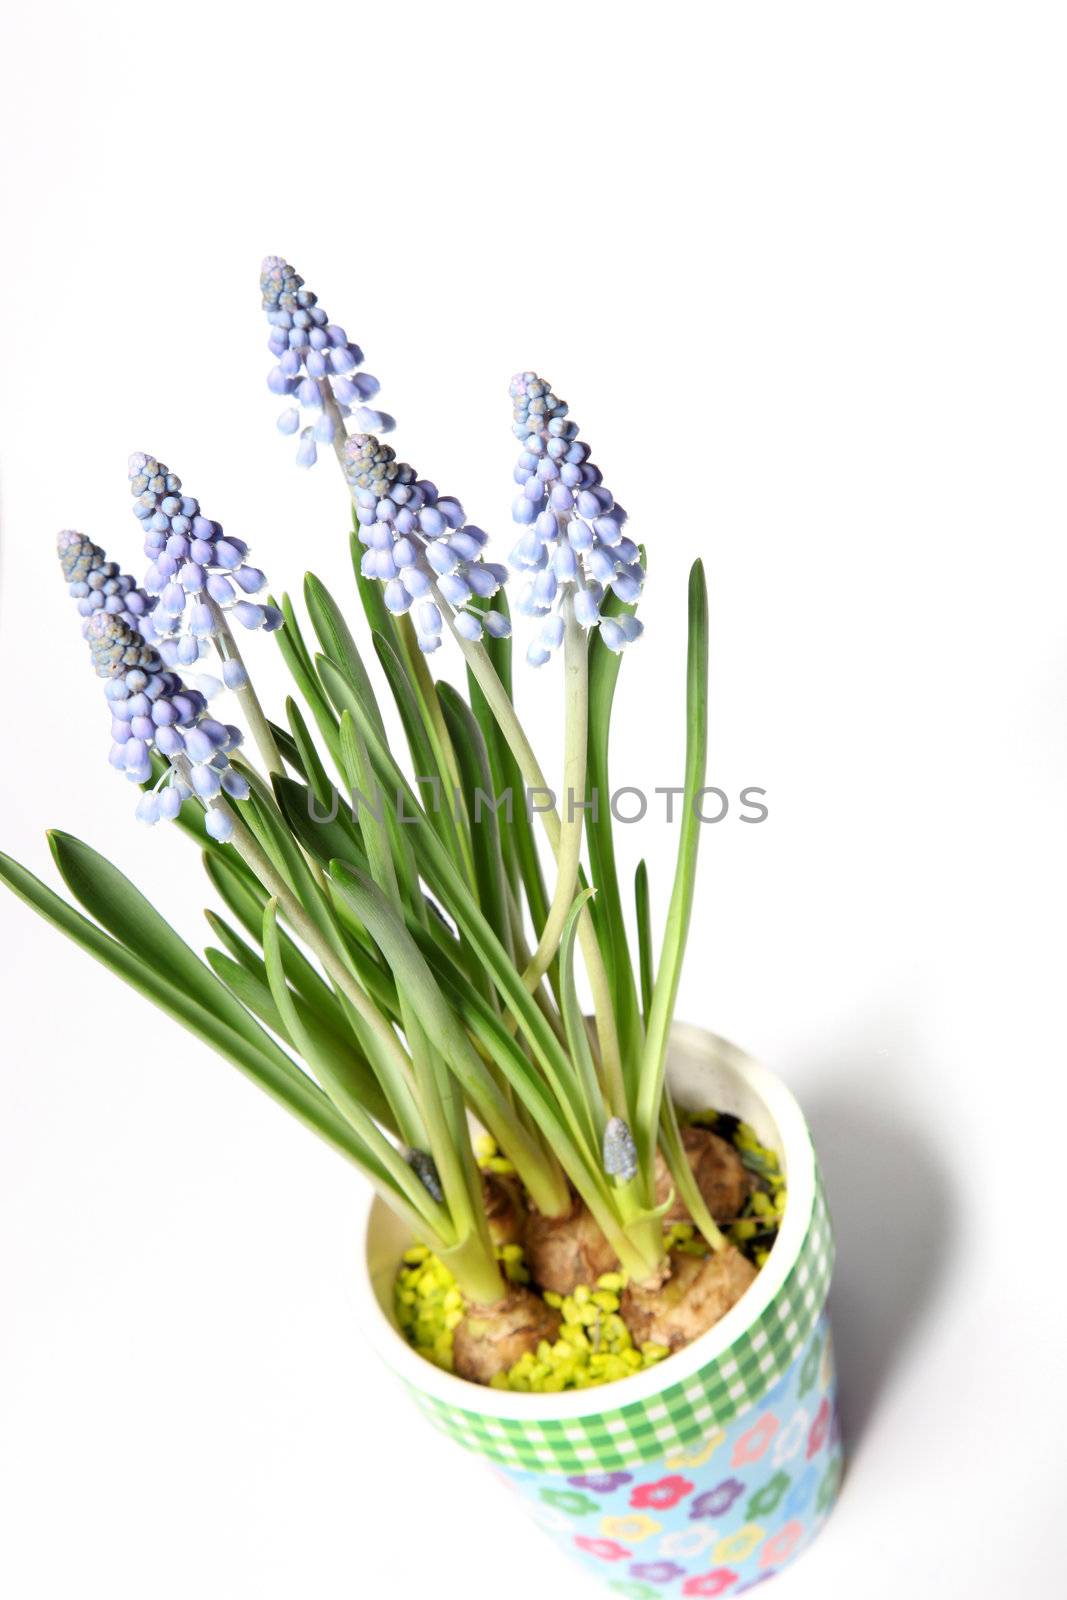 Lavender in a colorful pot from the top on a white background